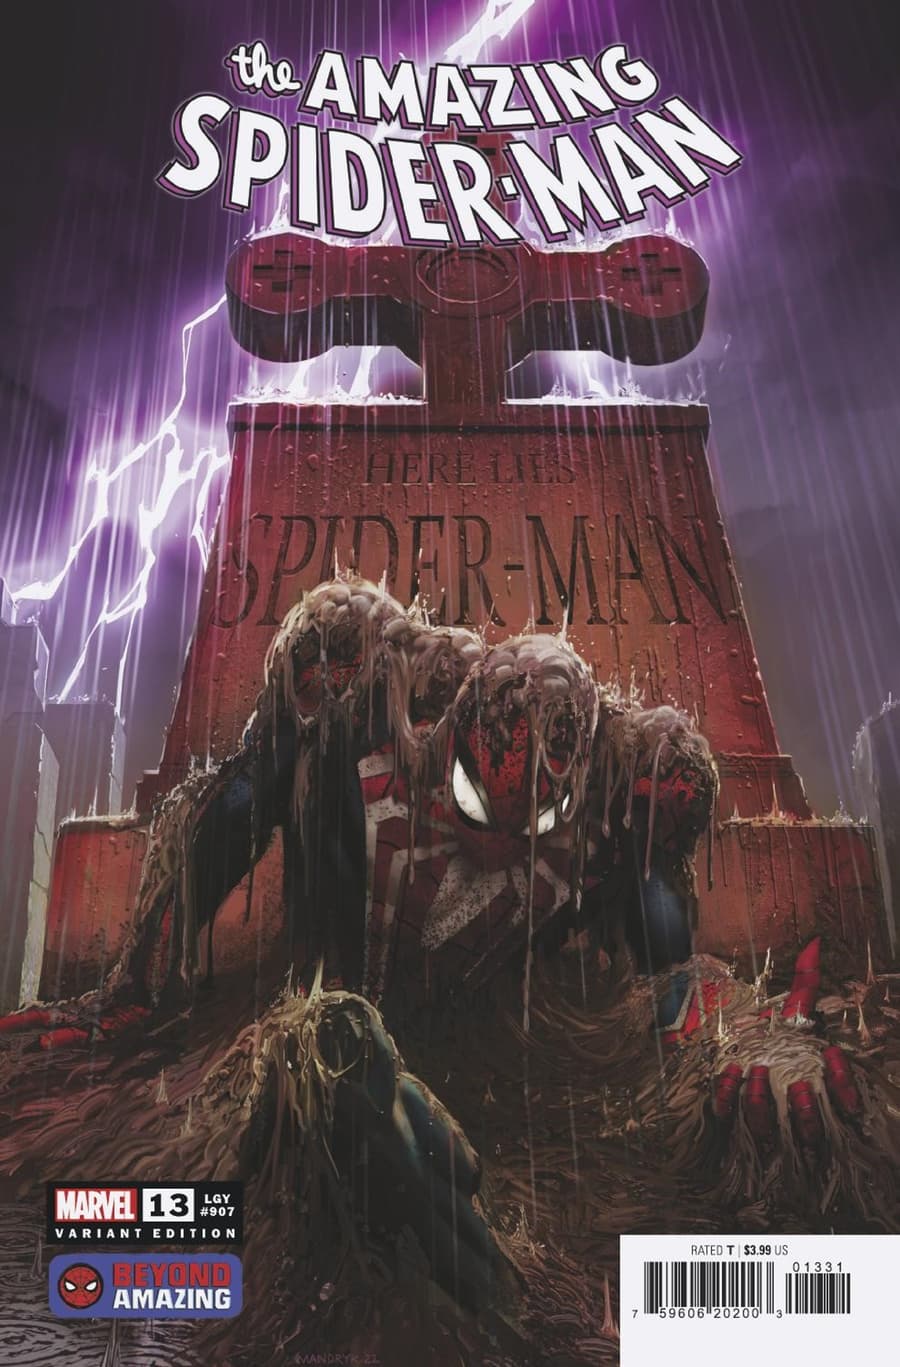 THE AMAZING SPIDER-MAN #13 Insomniac Beyond Amazing Variant Cover by DARLY MANDRYK